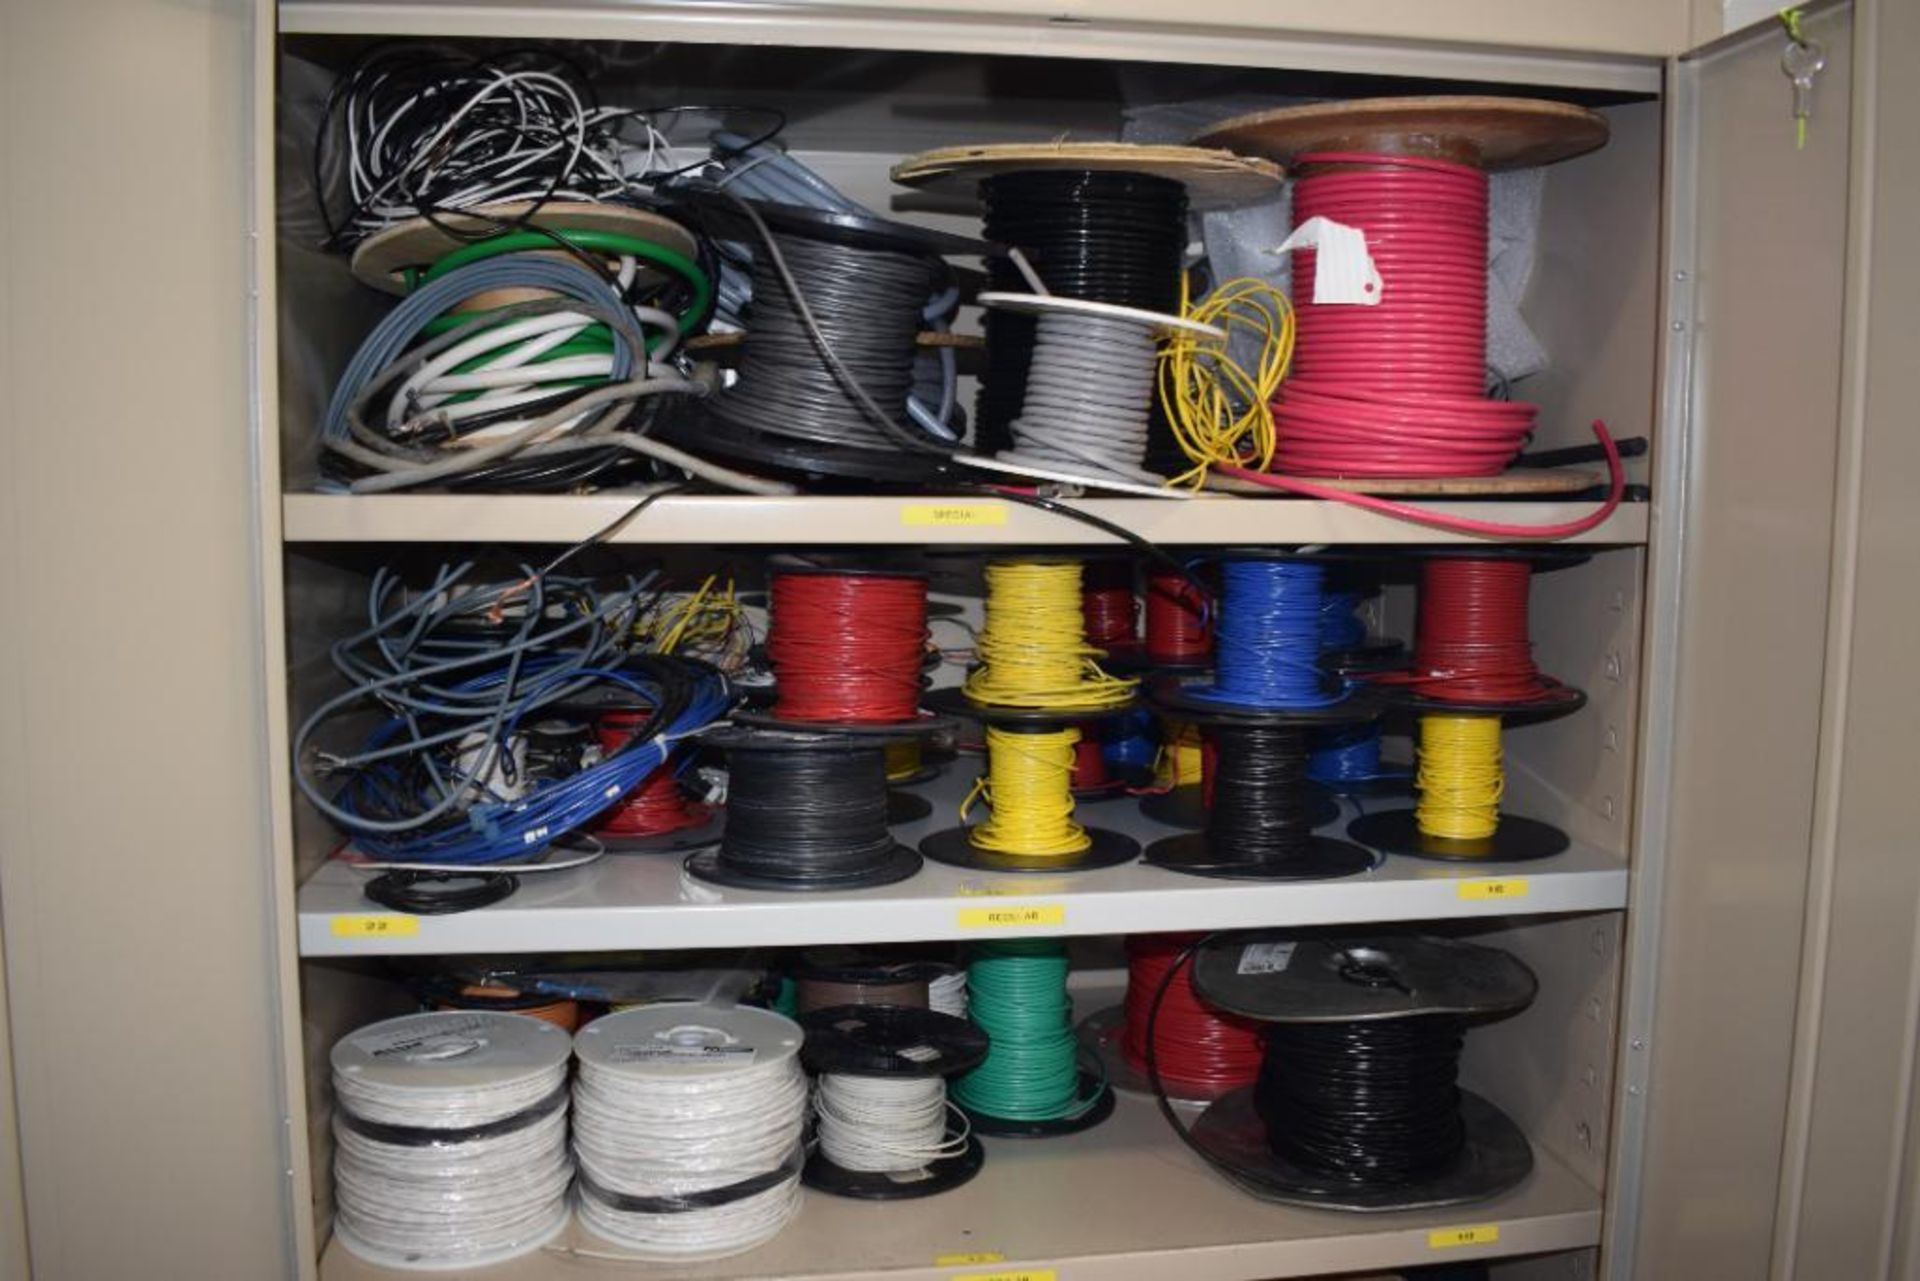 Lot Consisting Of: Miscellaneous Wire Spools, (1) 2 door metal cabinet, (2) wire spool carts. - Image 4 of 8